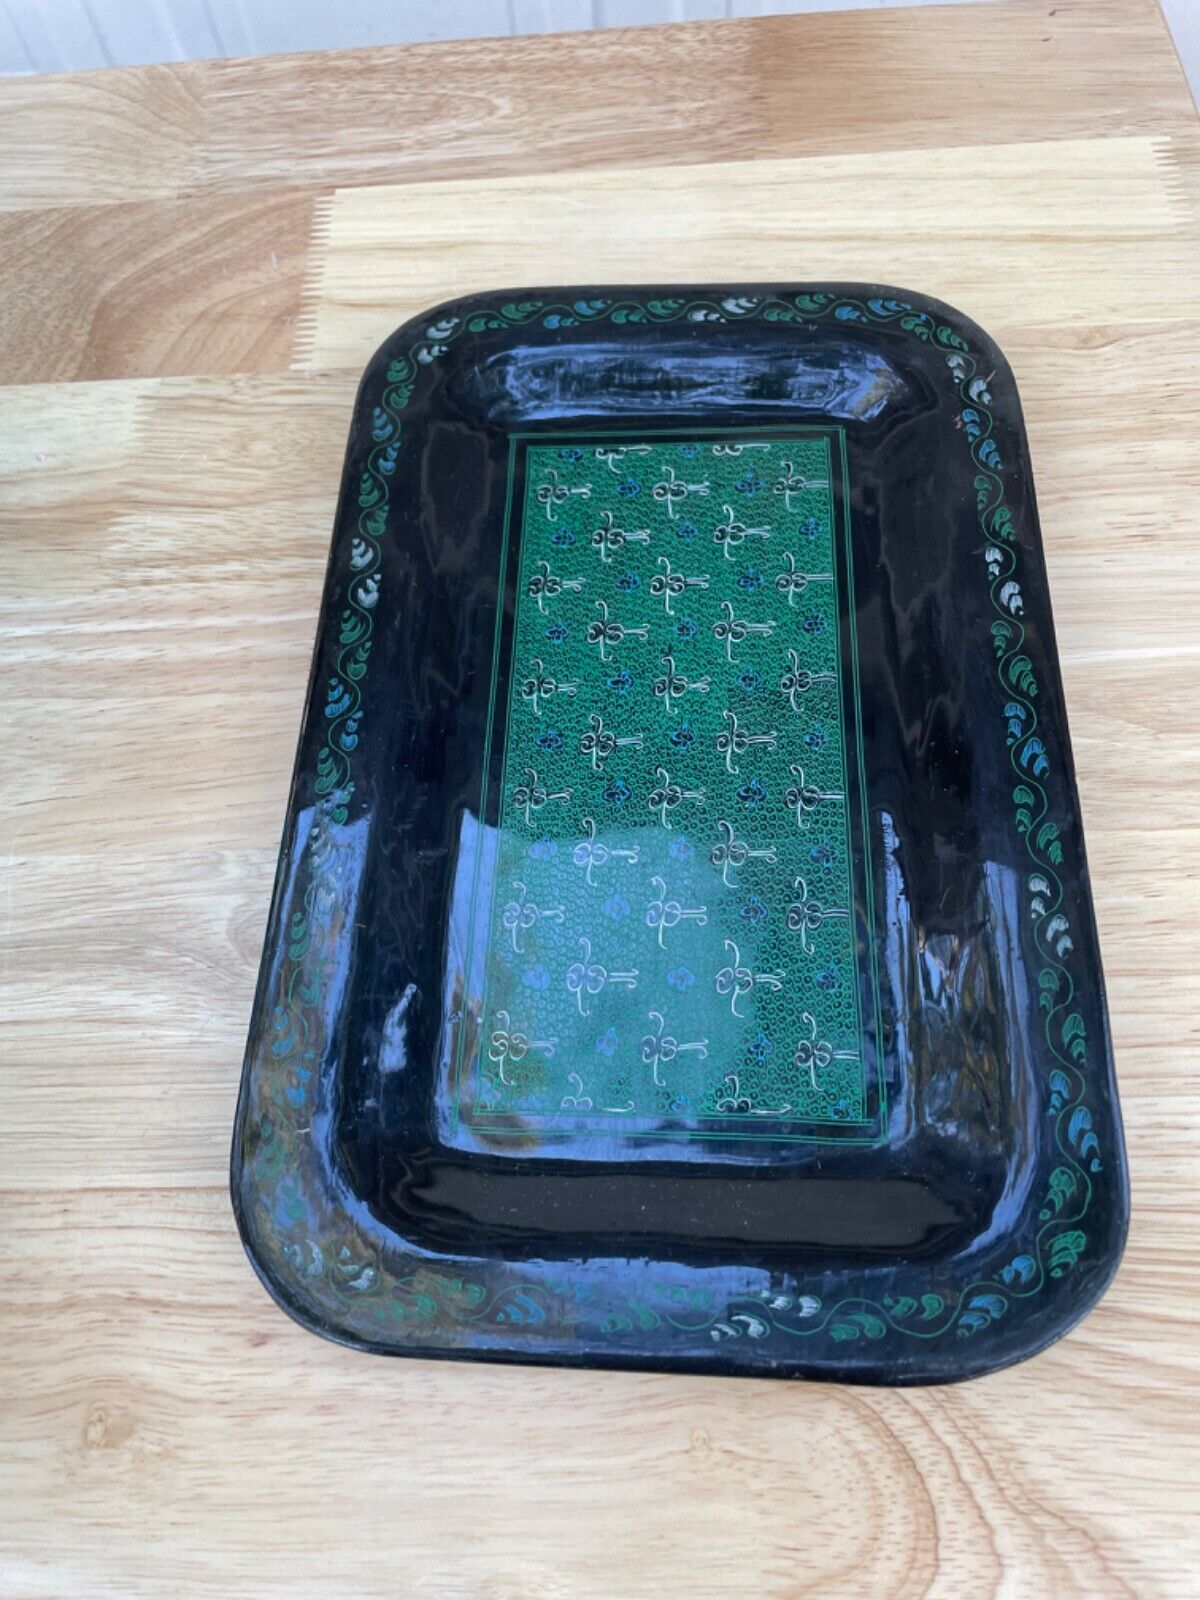 Black vintage valet tray with intricate designs in blue and green